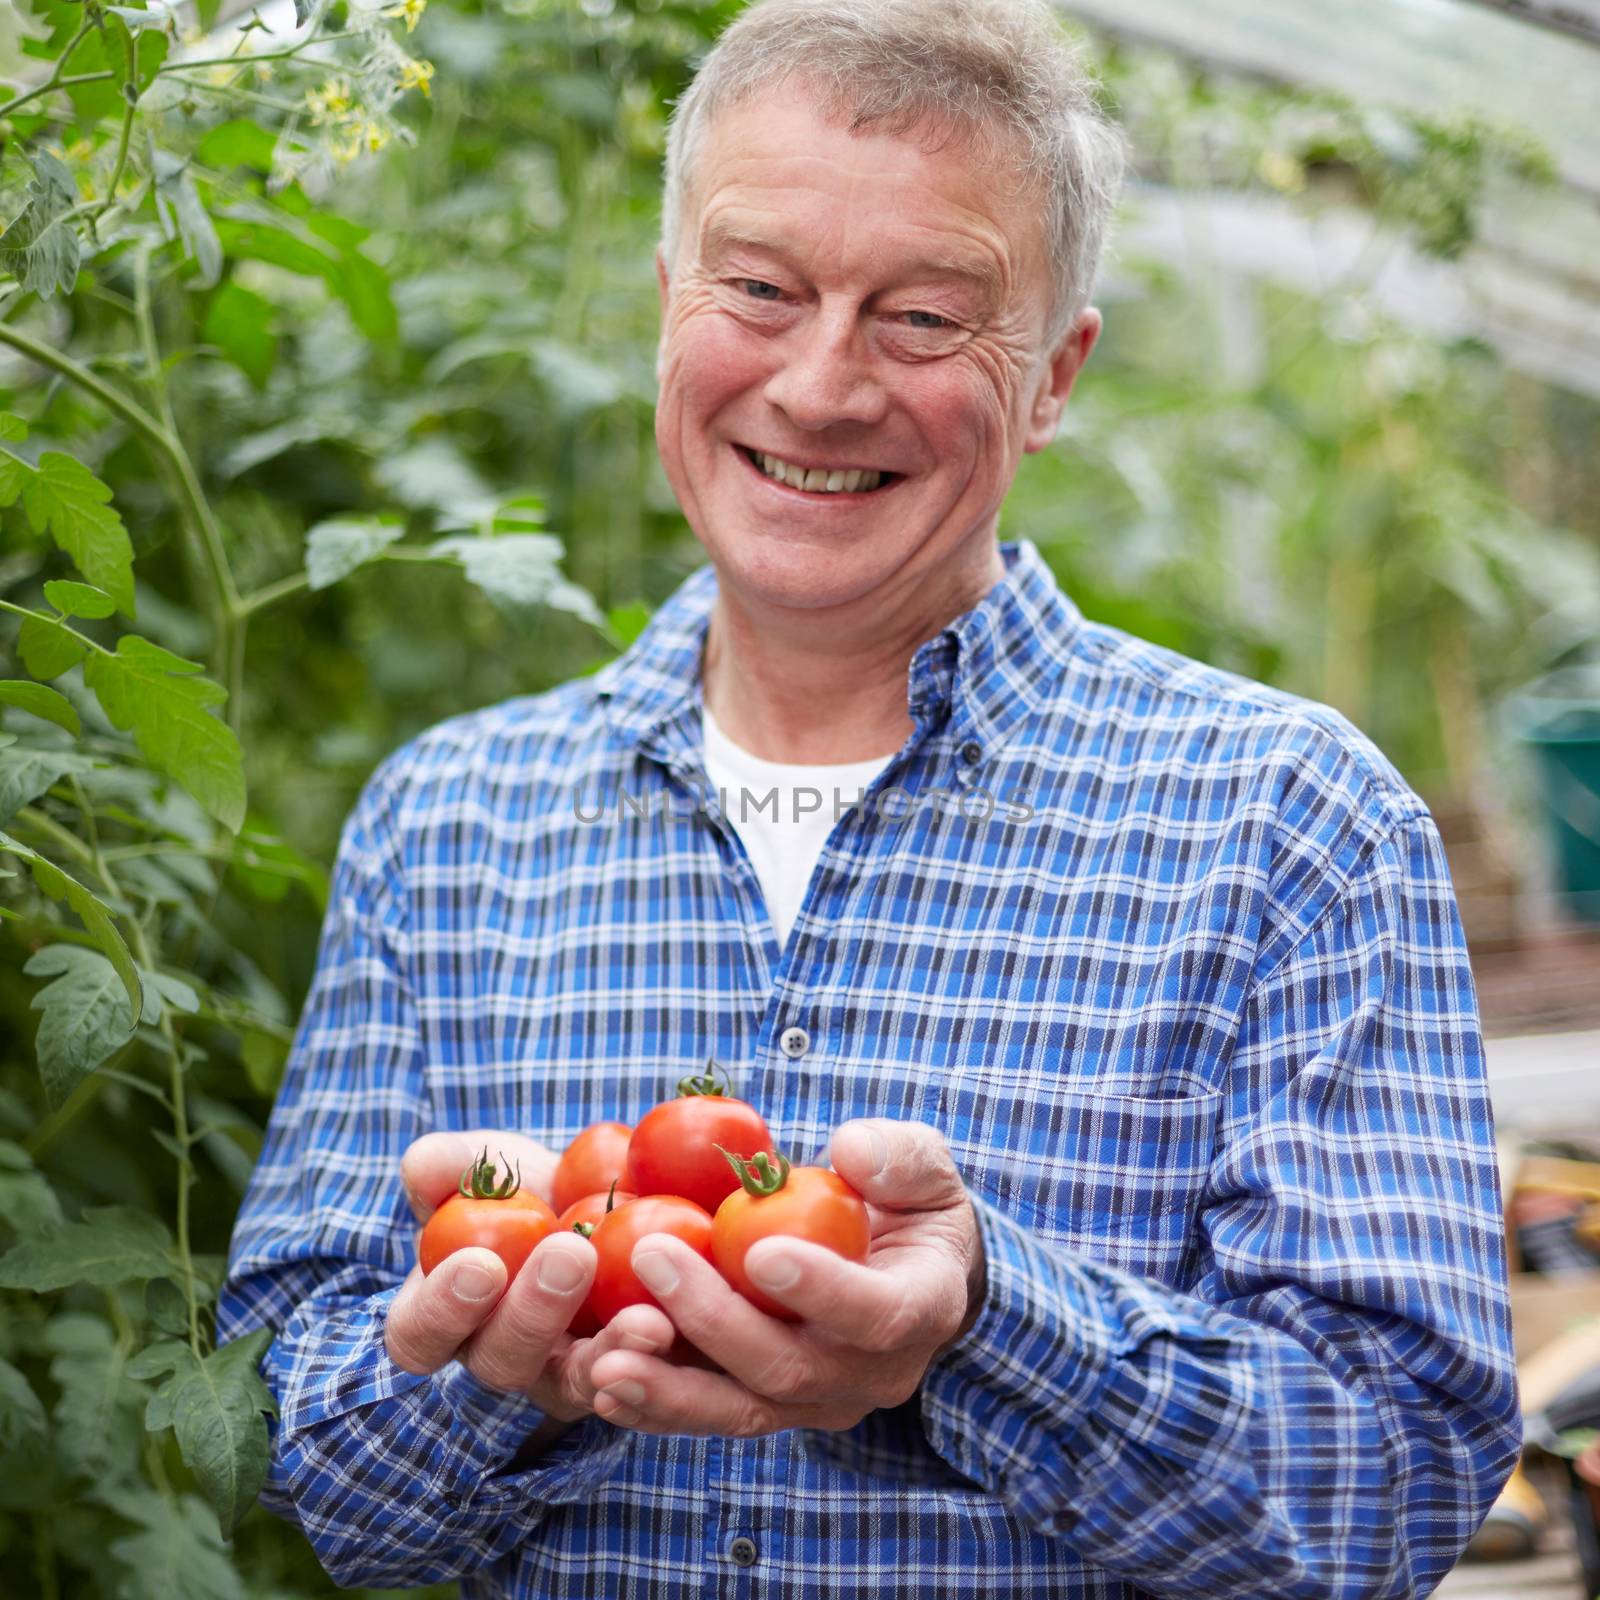 Senior Man In Greenhouse With Home Grown Tomatoes by HWS